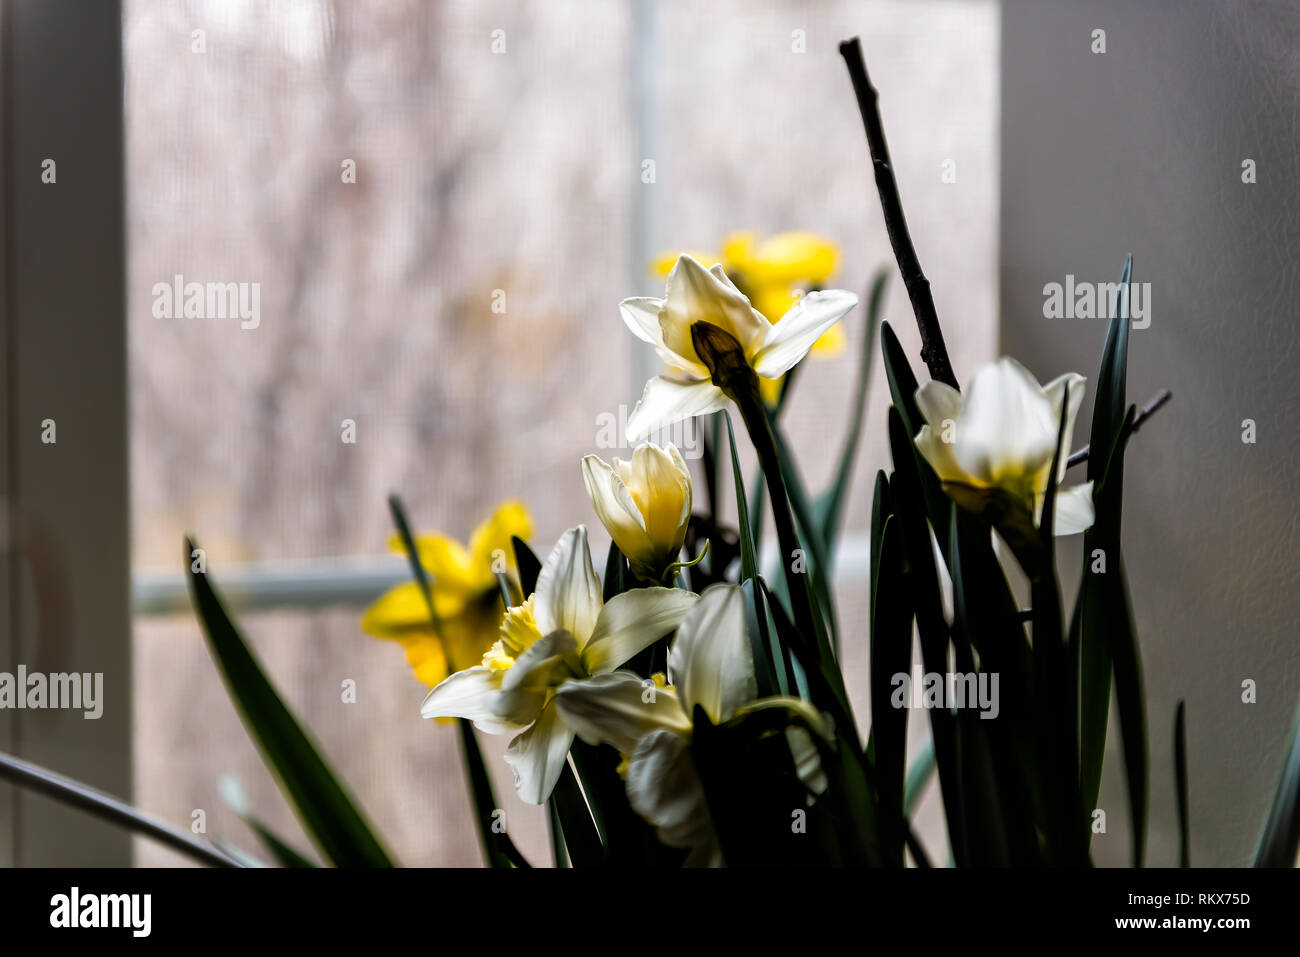 Many open white and yellow daffodil flowers silhouette indoors inside home house by window looking outside to sunlight in spring Stock Photo